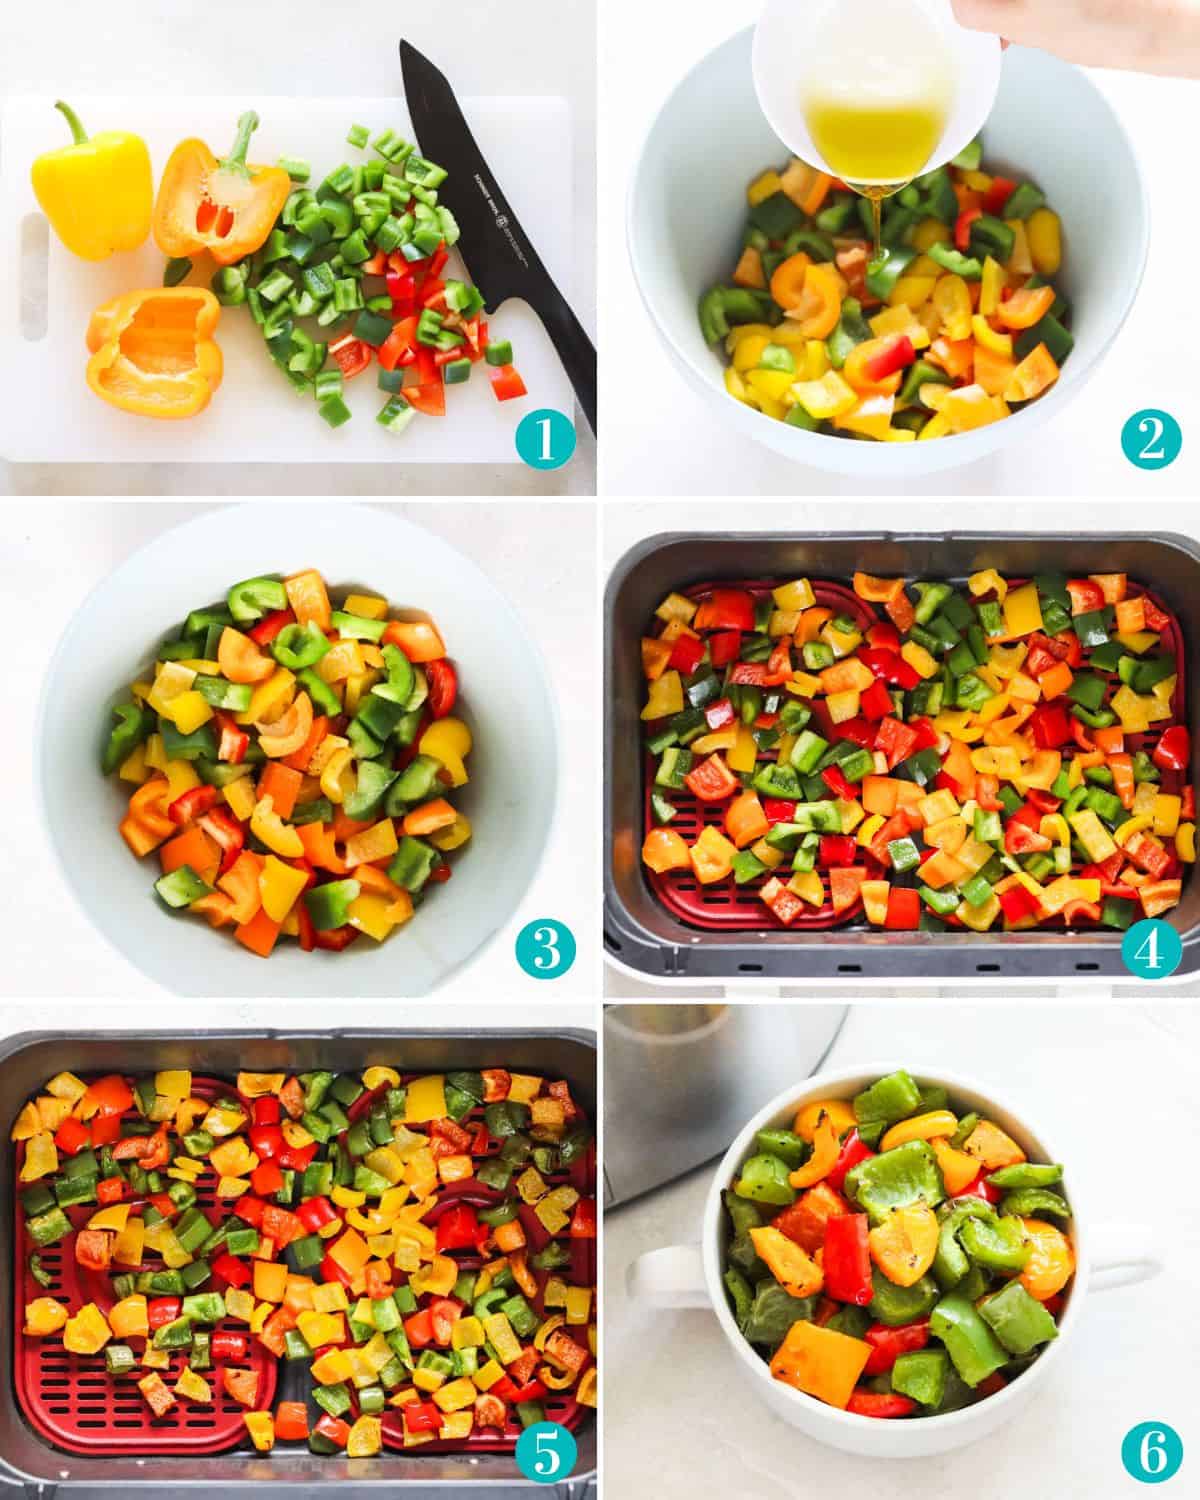 six photo collage with bell peppers being chopped, then peppers in a bowl with oil pouring on top, bell peppers with salt and pepper, bell peppers in air fryer before and after cooking, then a bowl of roasted peppers.